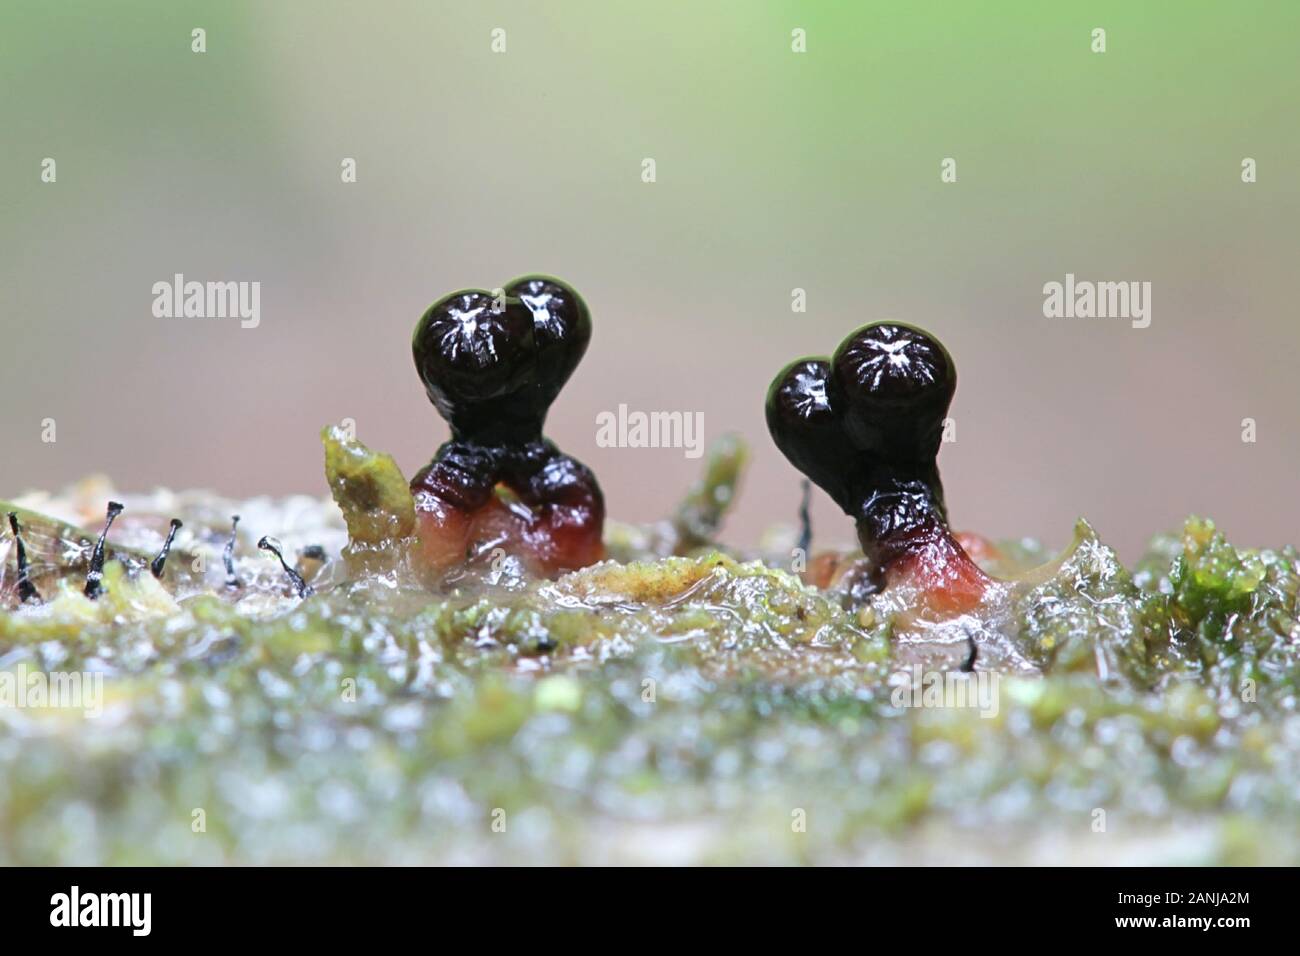 Trichia botrytis, a slime mold of the family Trichiaceae, specimen from Finland Stock Photo